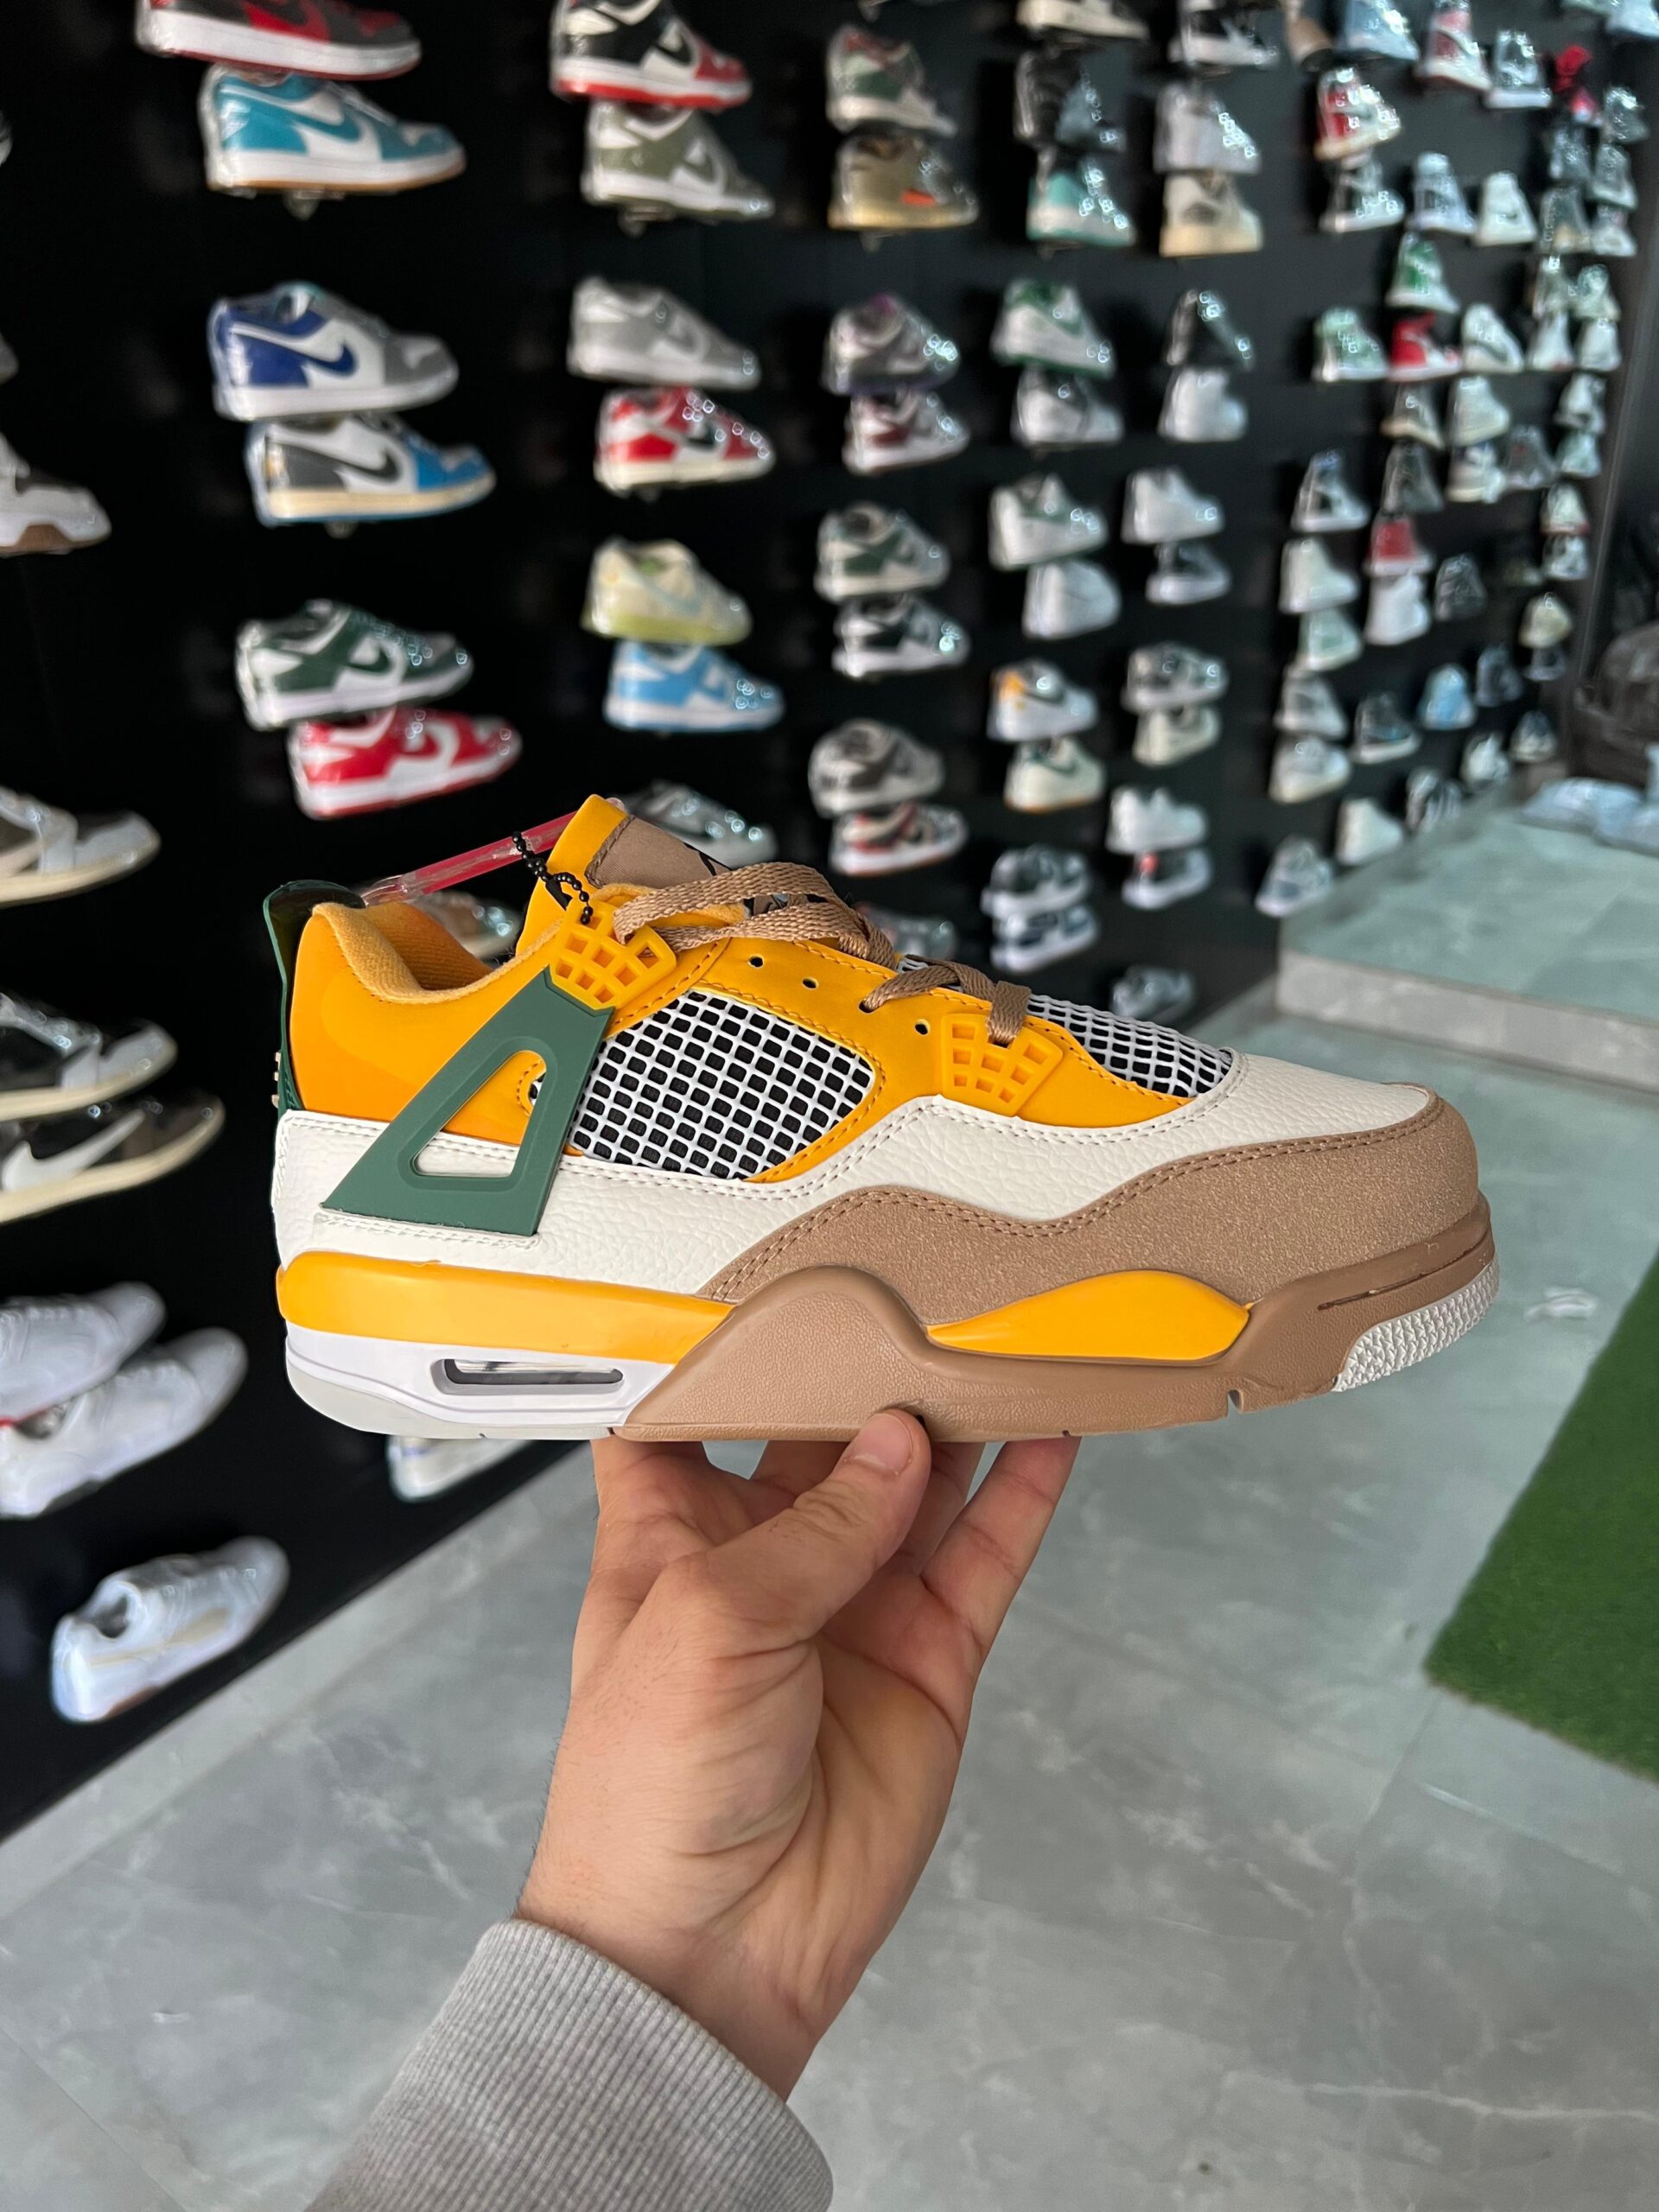 Retro 4 First Copy 5 New Colours In Stock